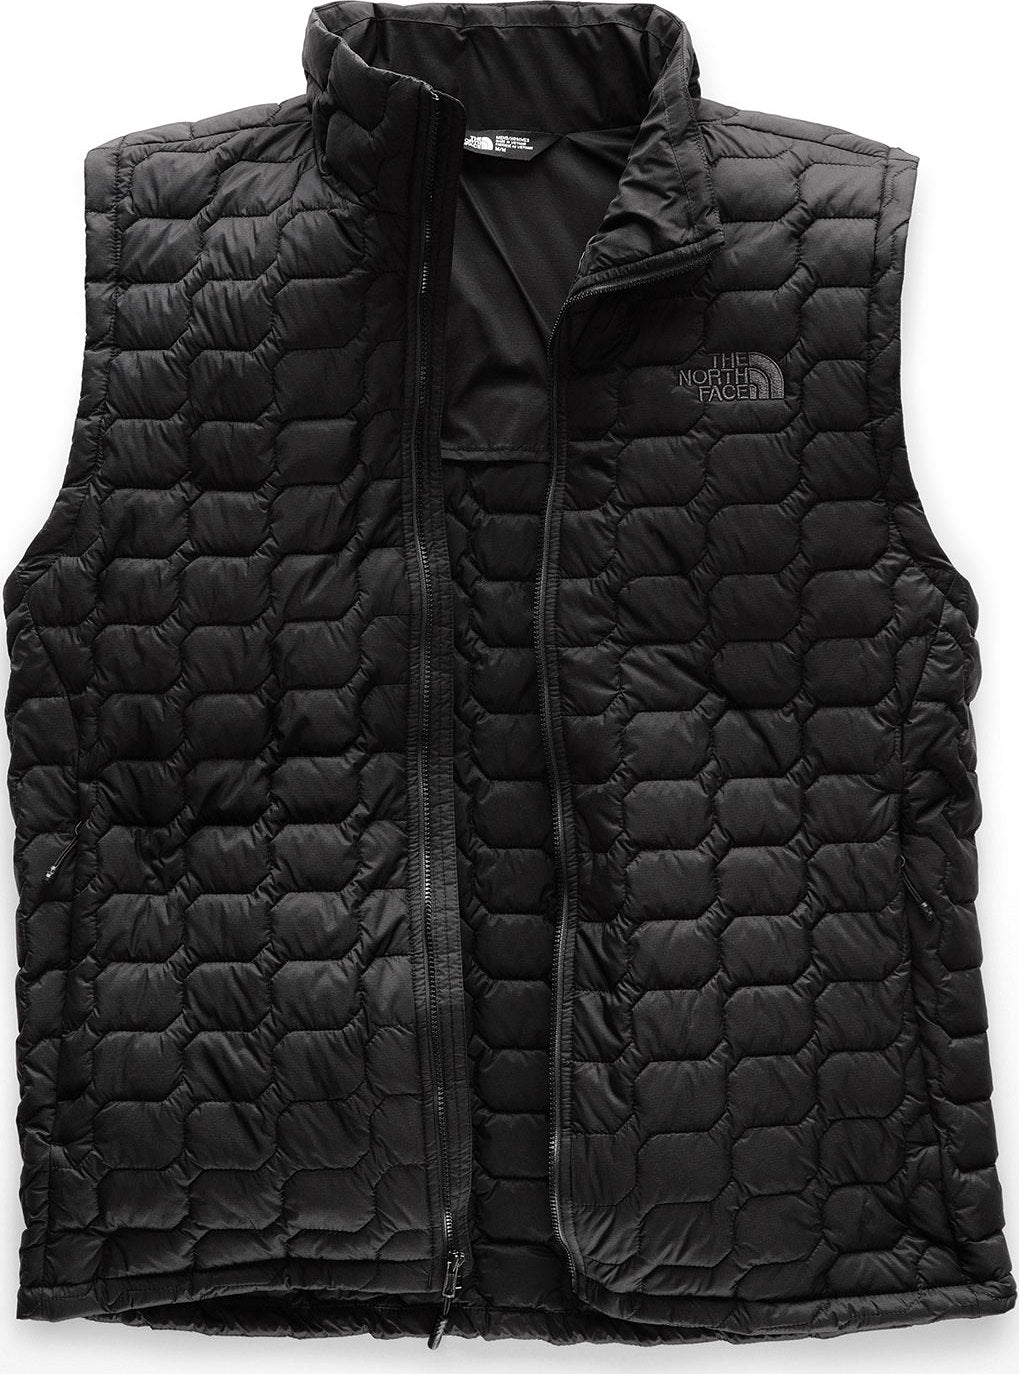 The North Face ThermoBall Vest - Men's | The Last Hunt